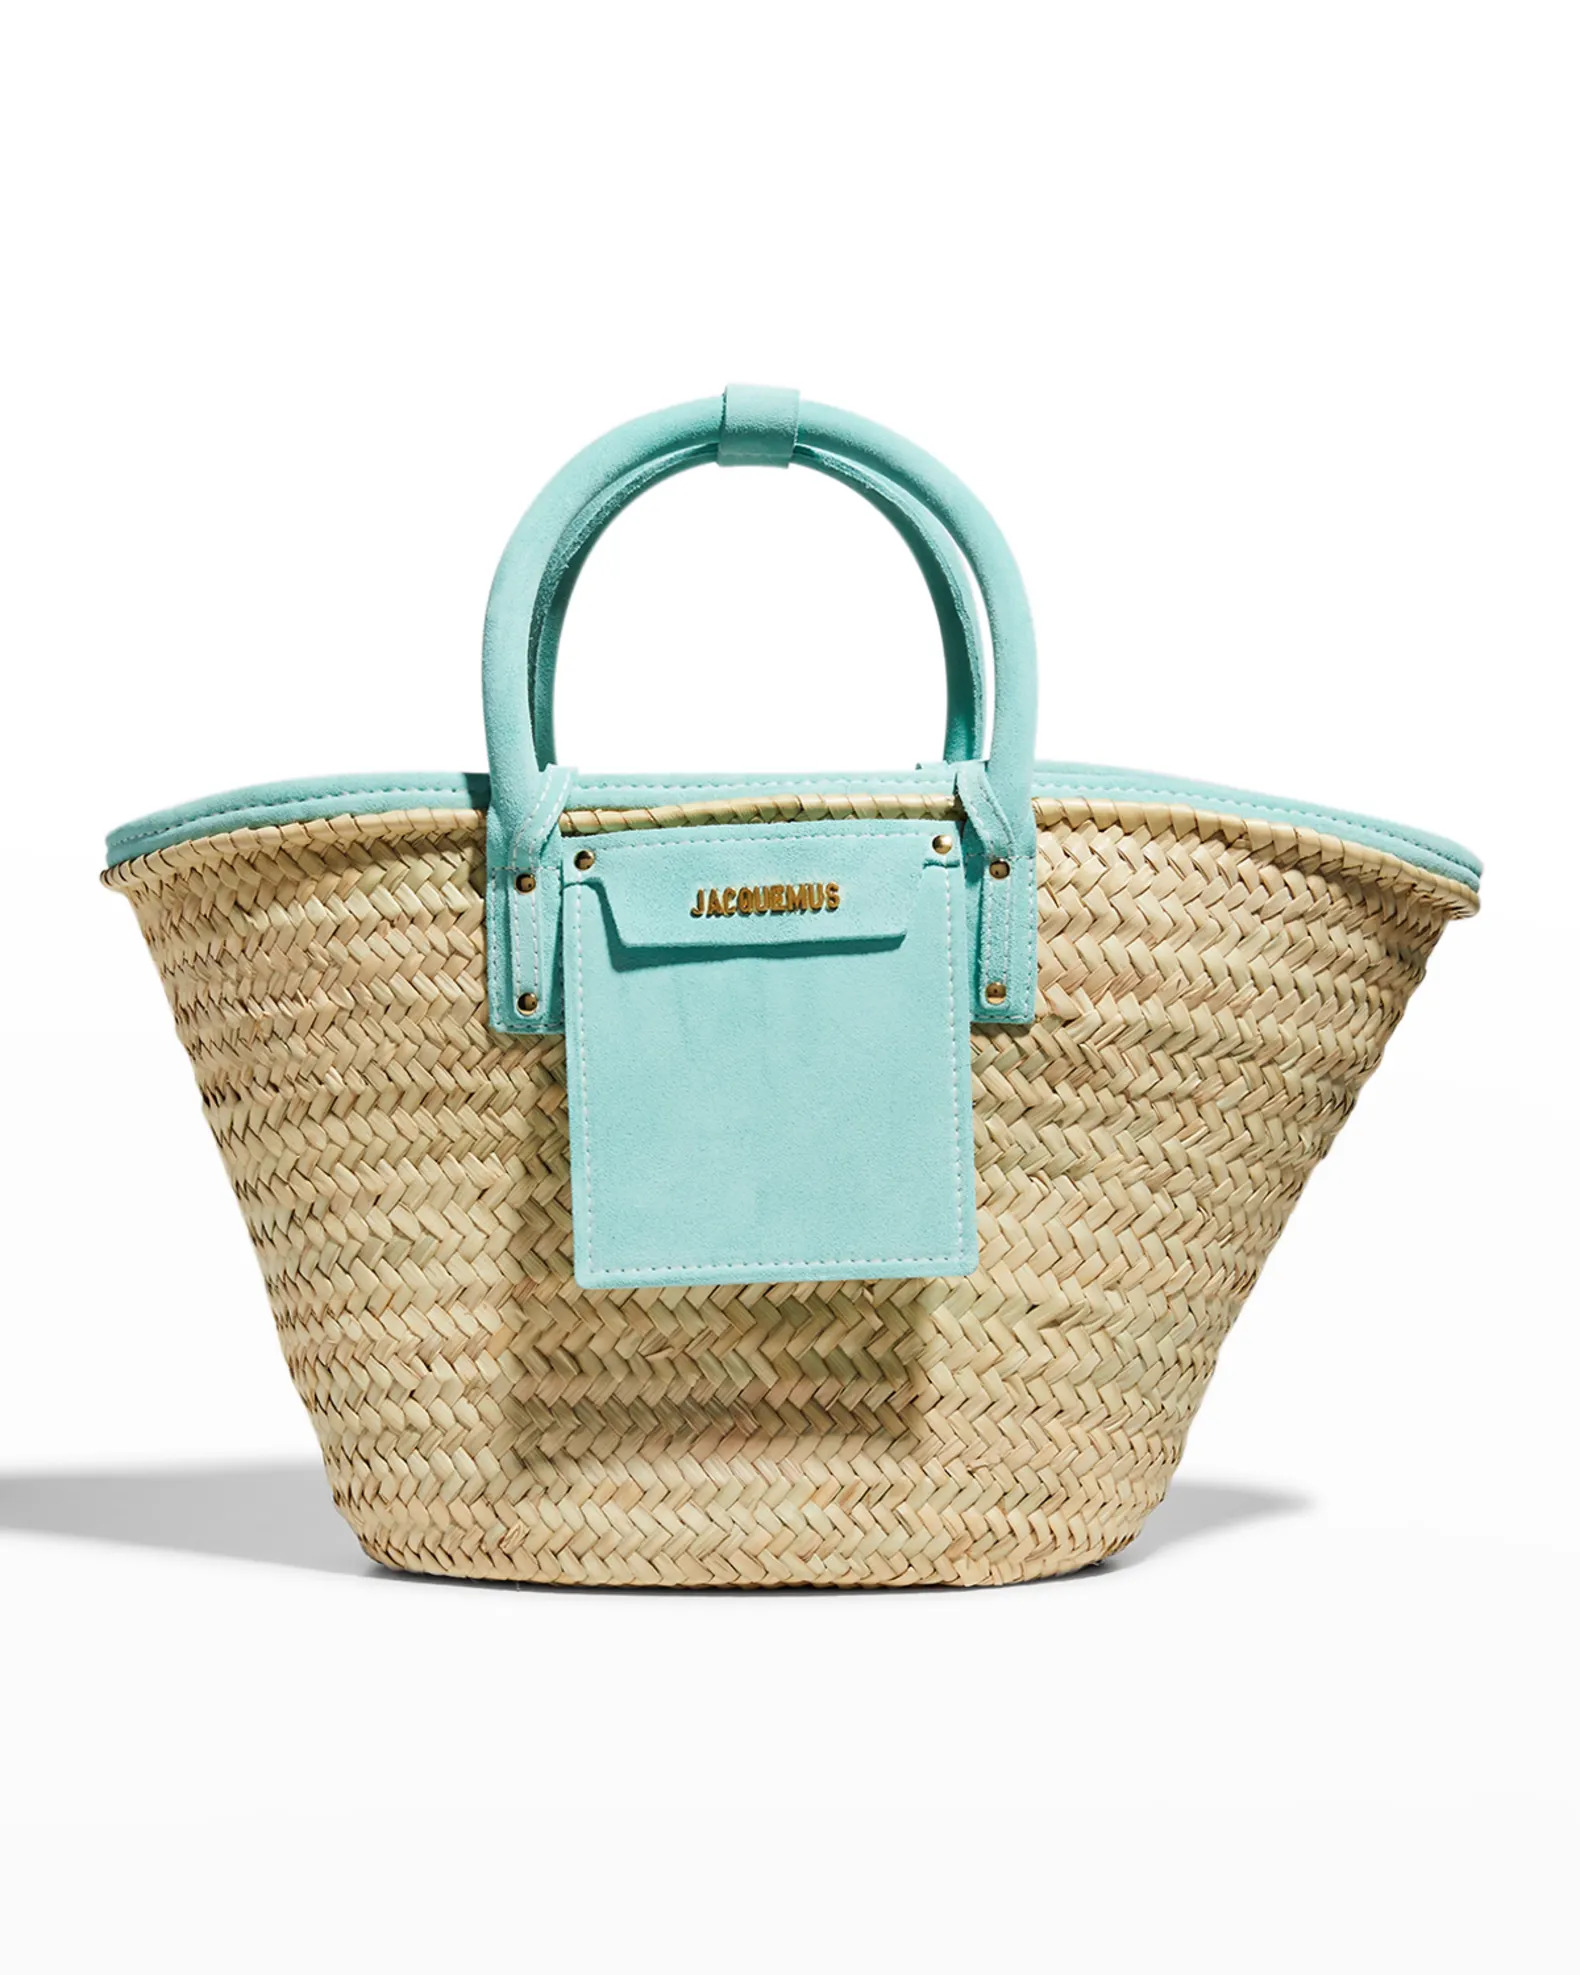 The First Resort 2018 Bag Pre-Orders Have Arrived at Neiman Marcus and Bergdorf  Goodman, Including Prada, Fendi and More - PurseBlog